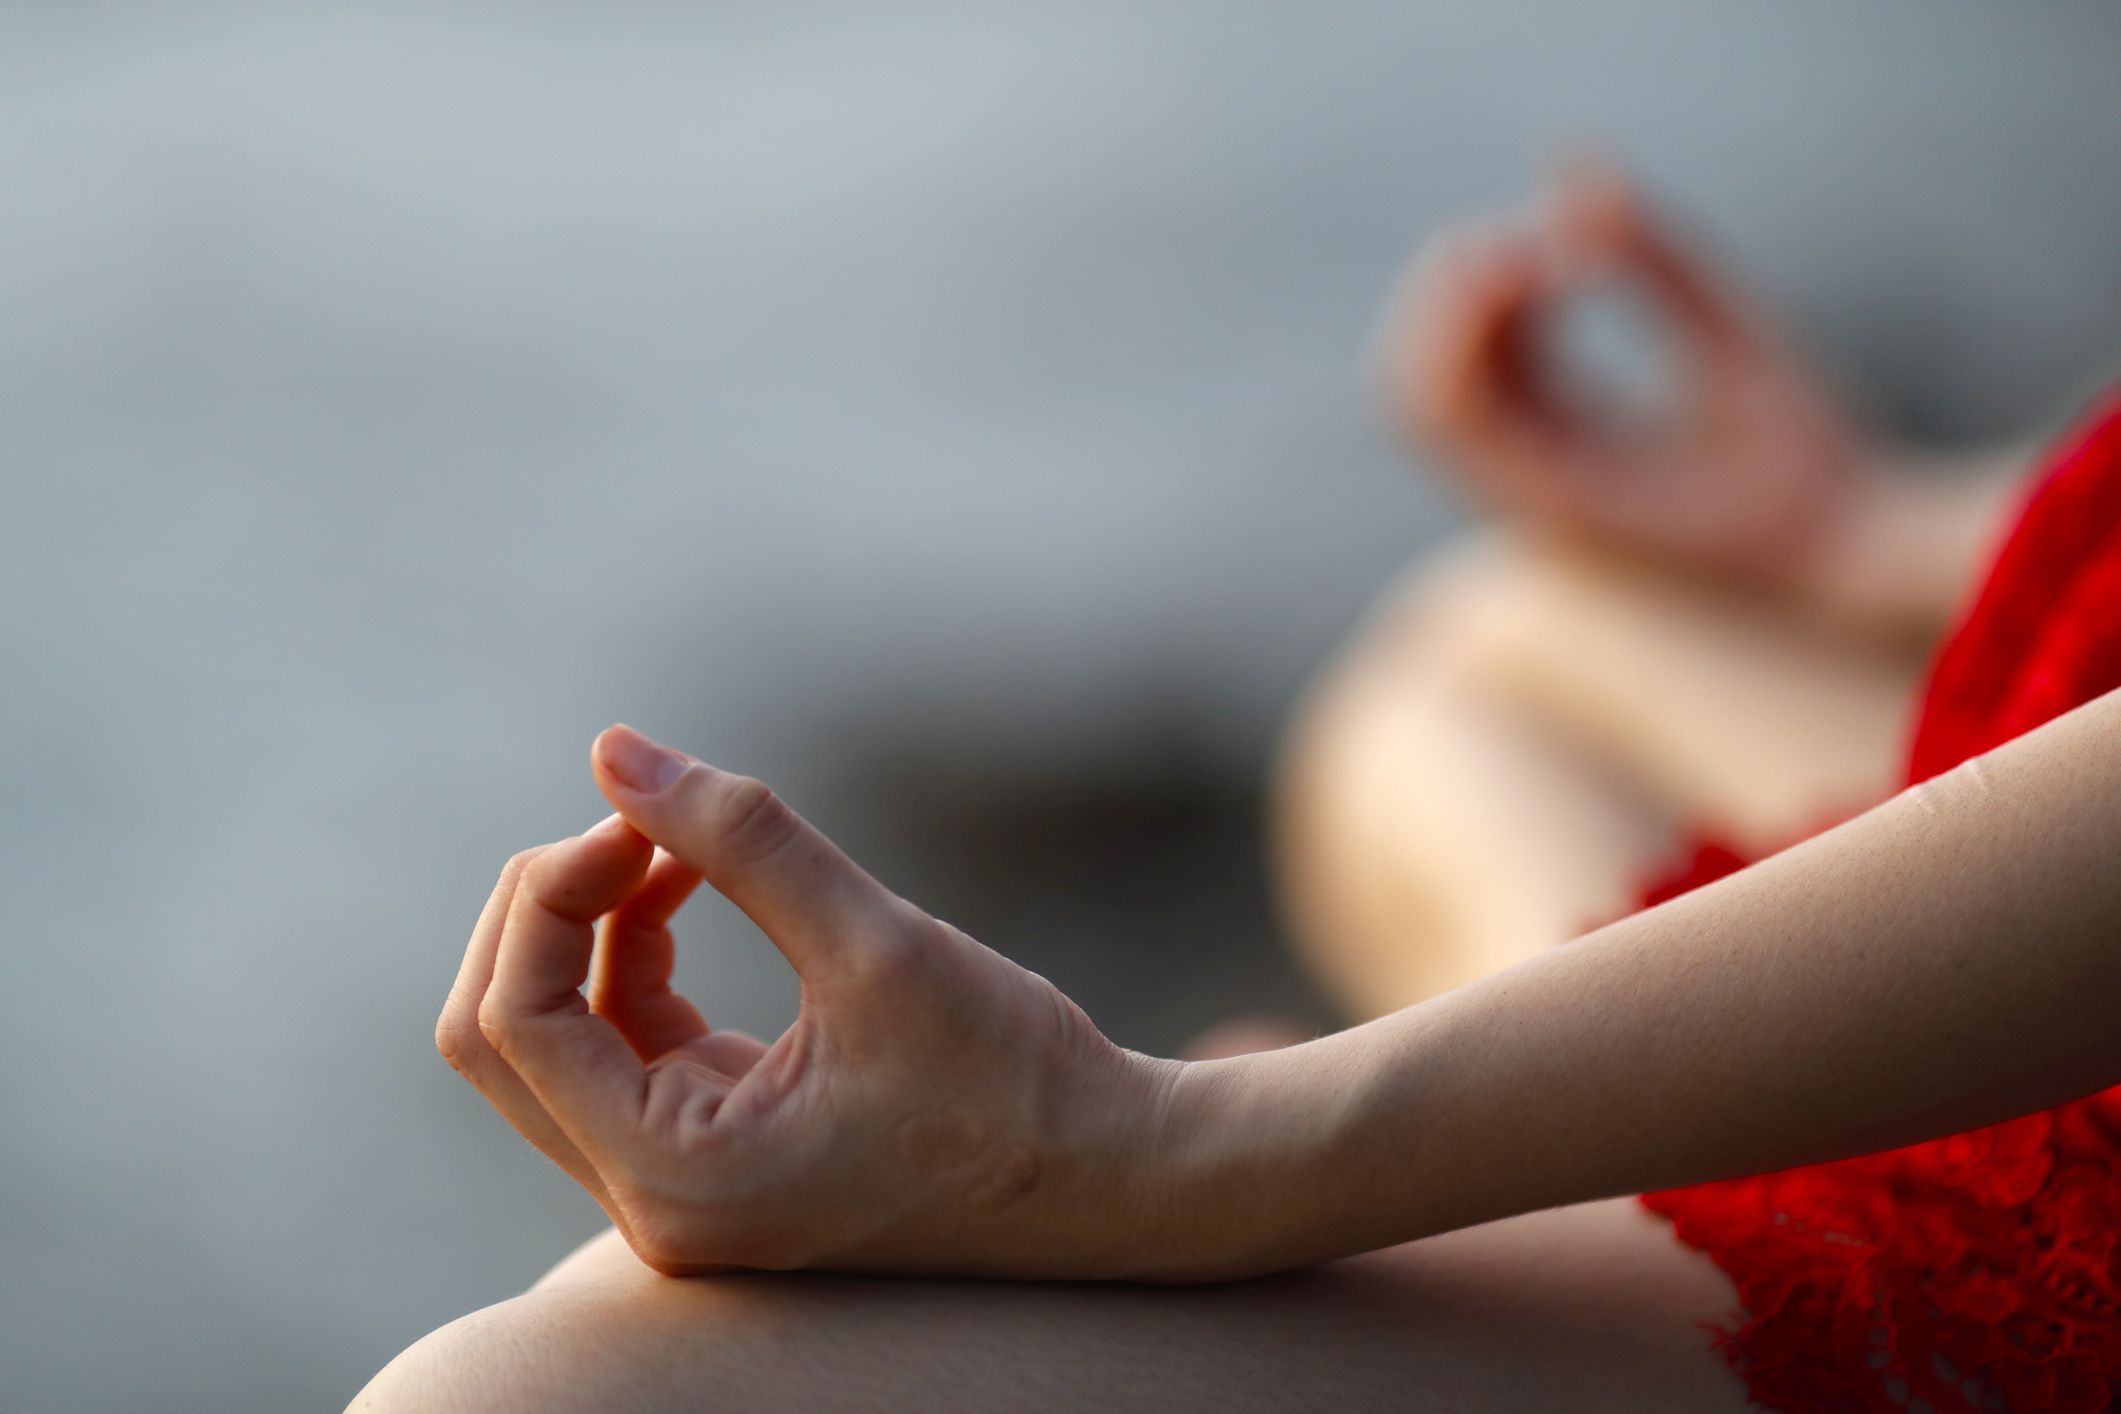 Useful material for Yoga and Meditation practice